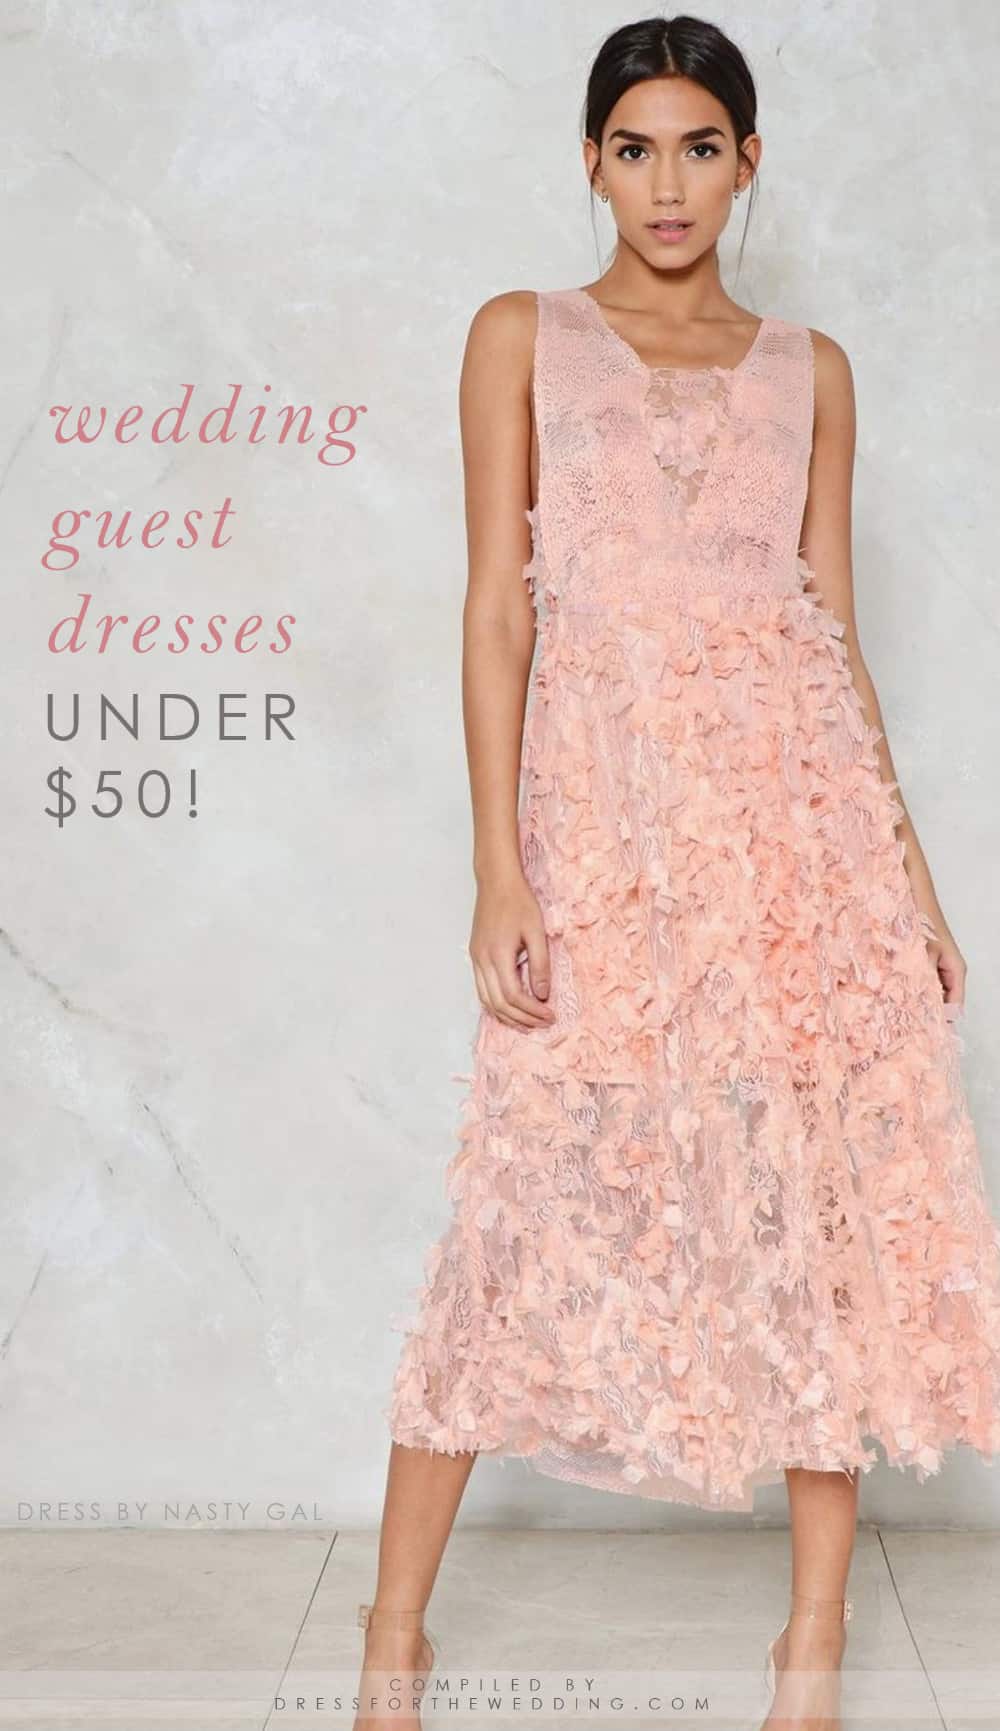 women's dresses for wedding guests over 50